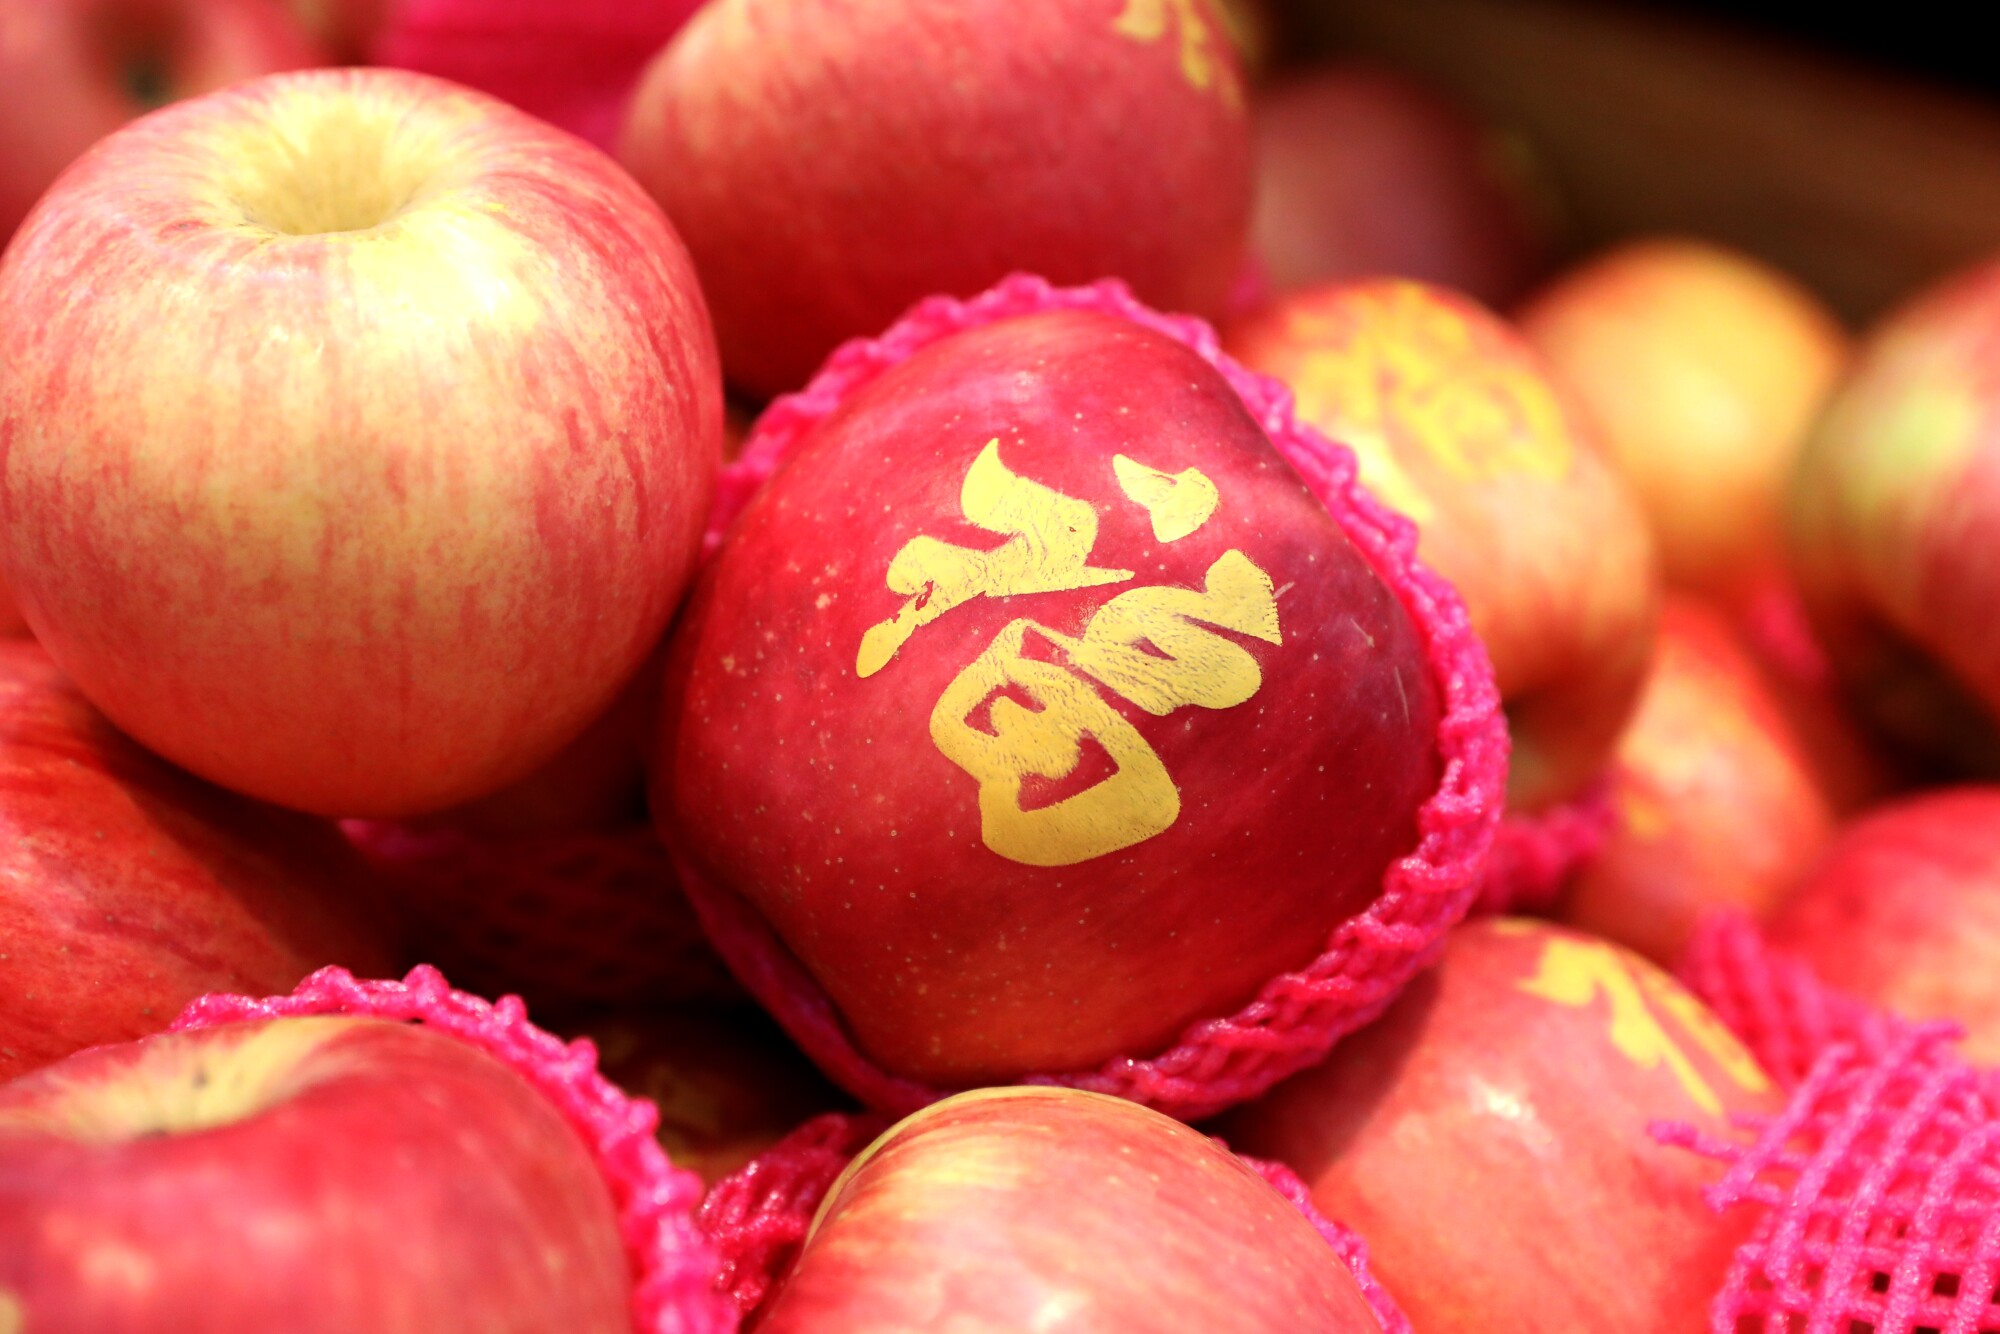 Festival Fuji apples stack up for sale at Great Wall Supermarket in Monterey Park.